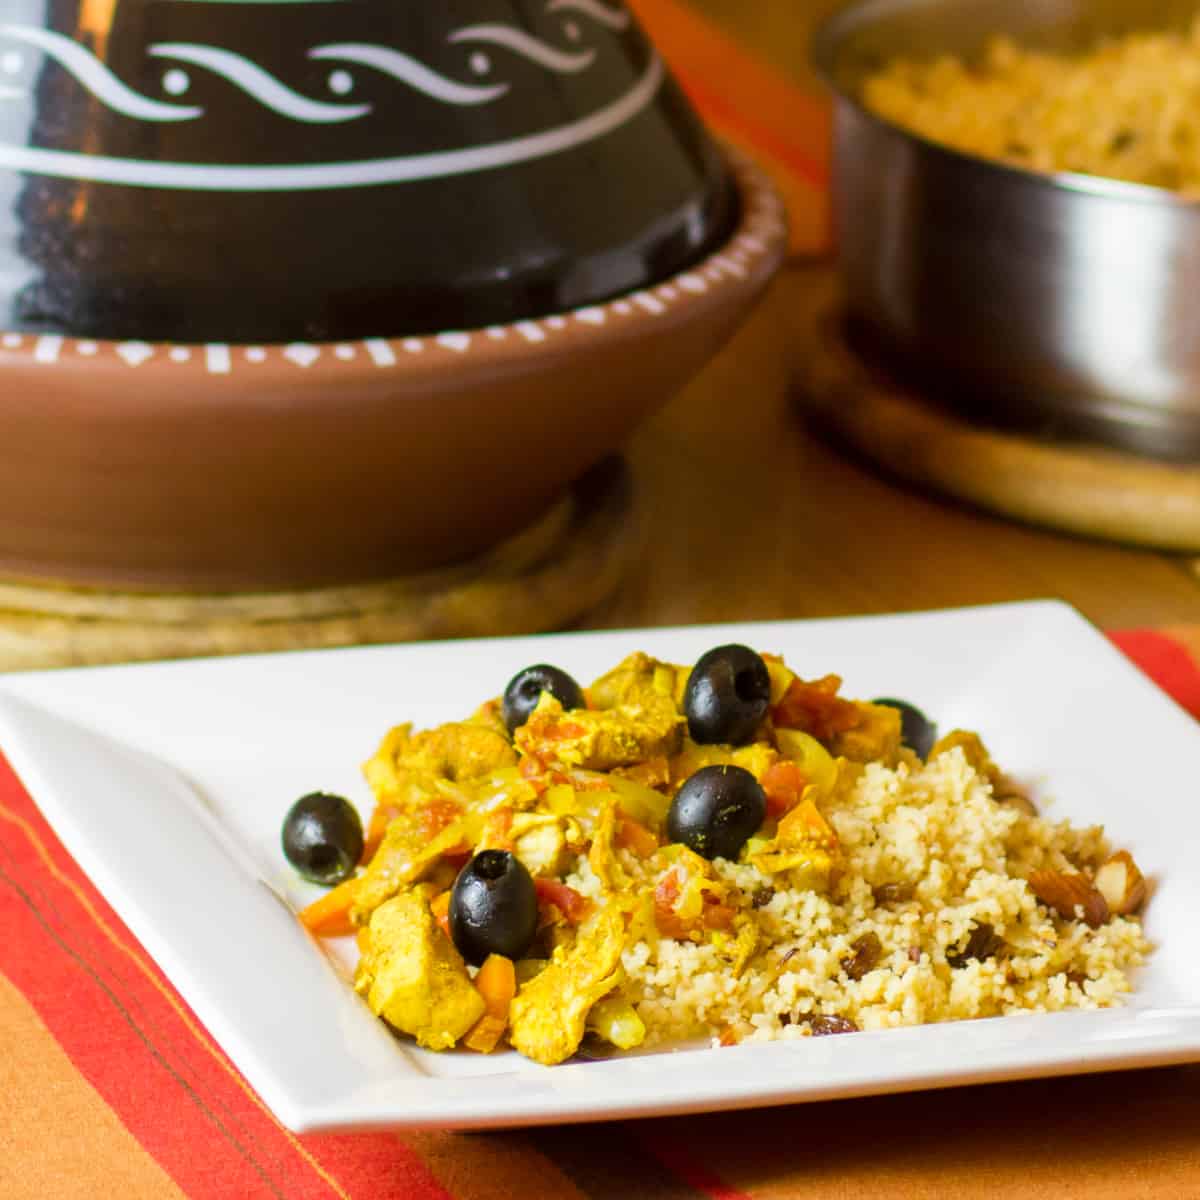 Tagine with chicken and black olives on a plate.